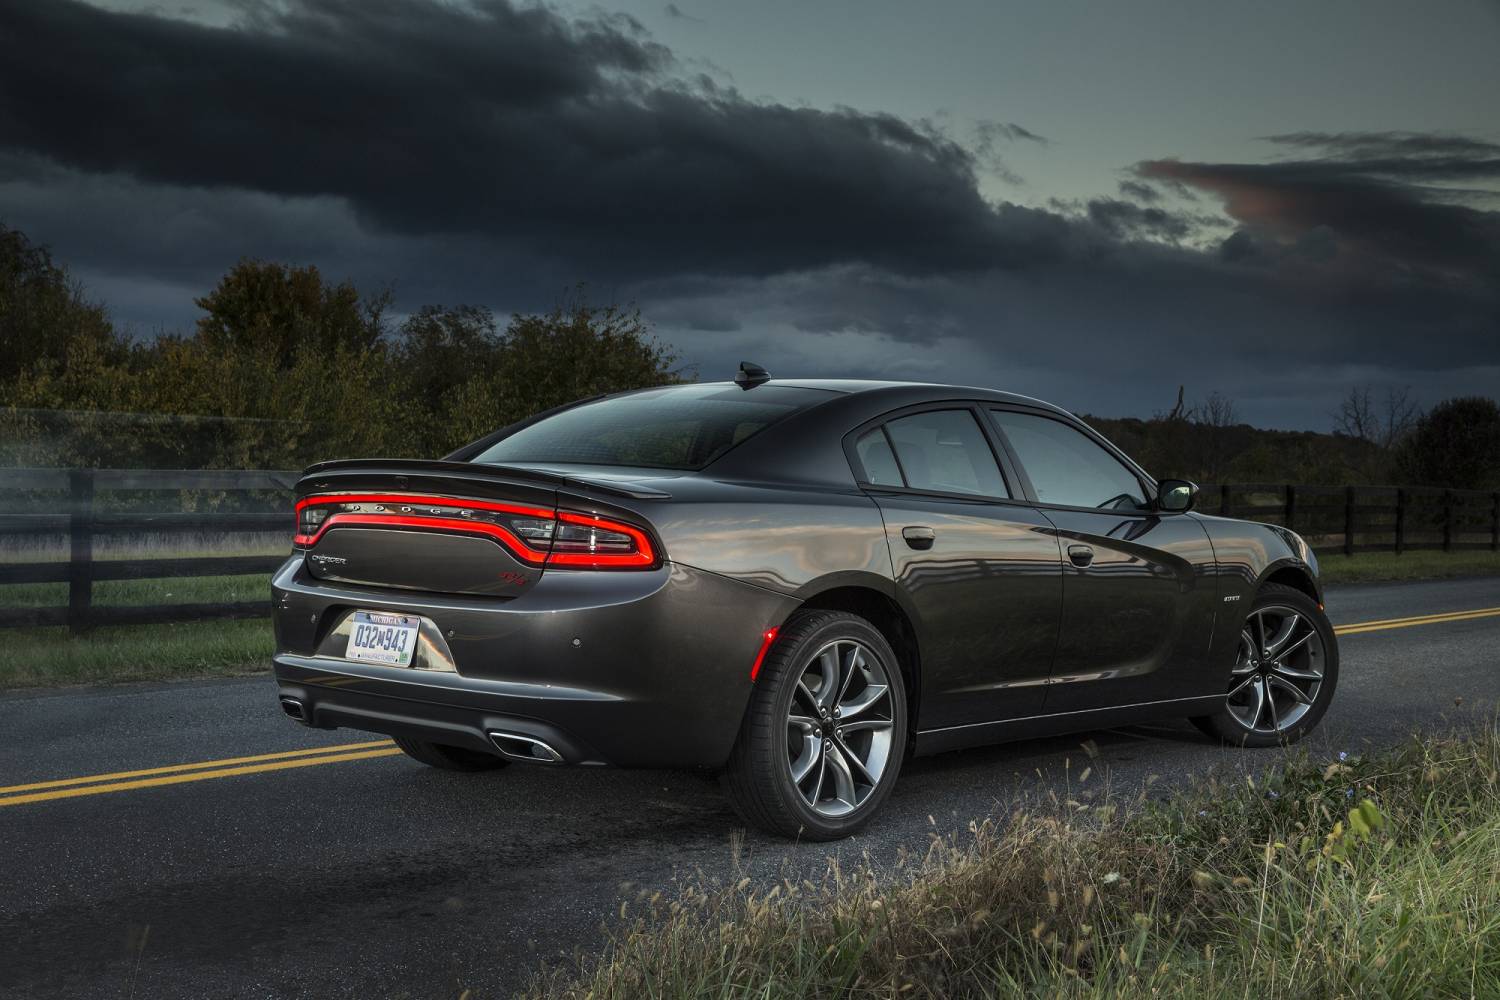 2015 Dodge Charger - HD Wallpaper 